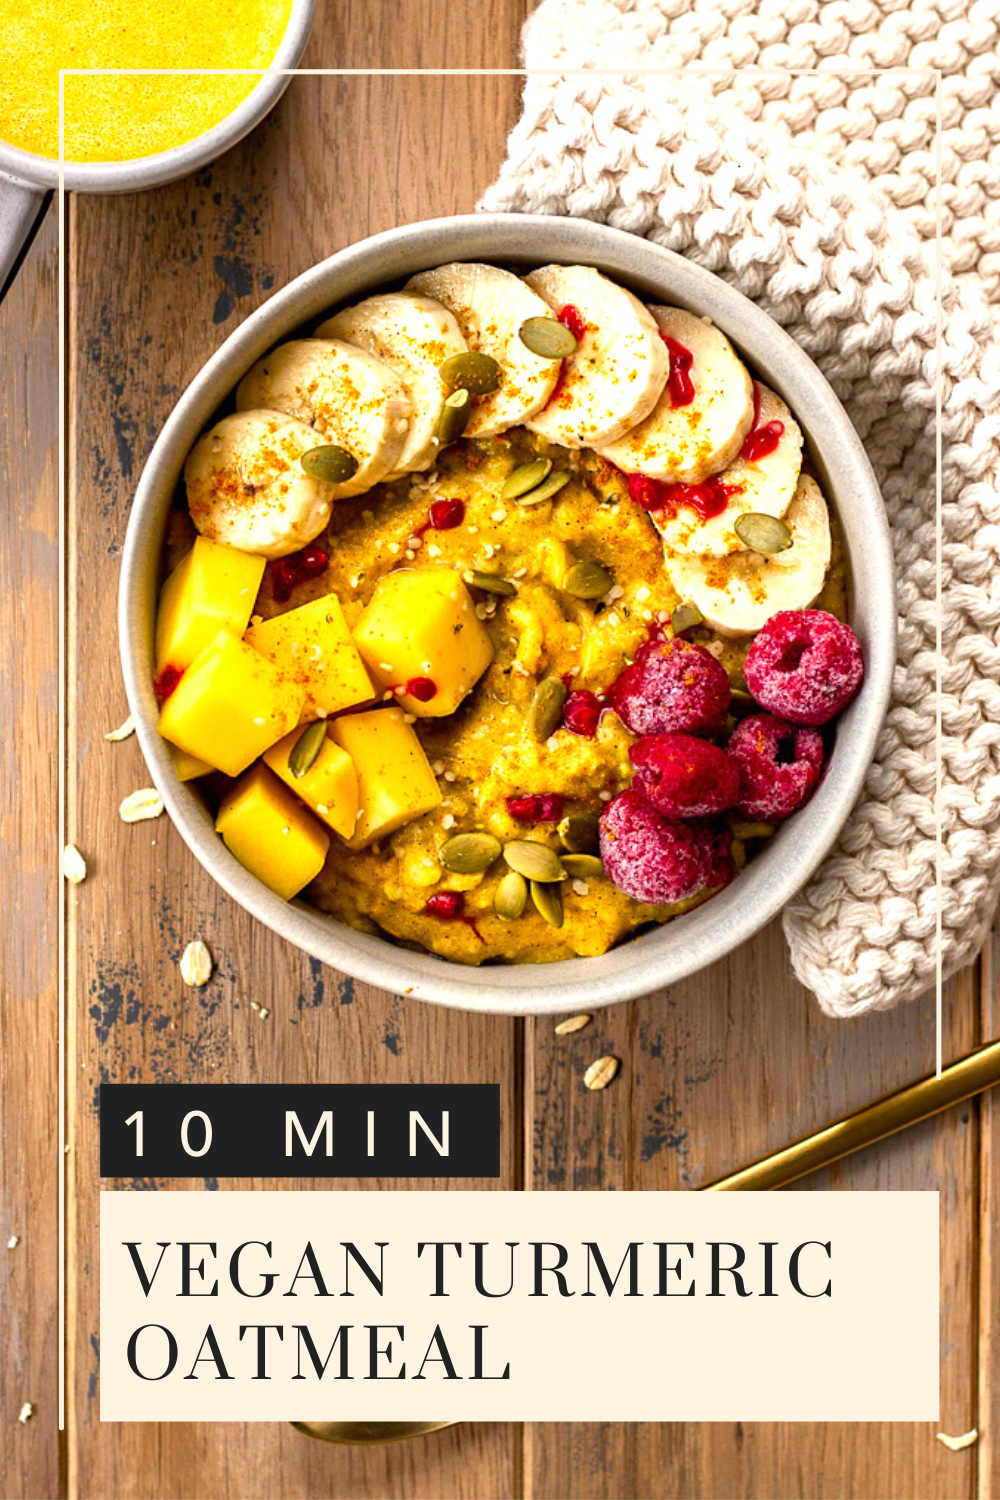 This 10 Minute Vegan Turmeric Oatmeal is perfect for a healthy breakfast. Made with warming spices and your favourite plant milk, it's a delicious treat that also makes a great vegan breakfast idea. By Vancouver with Love